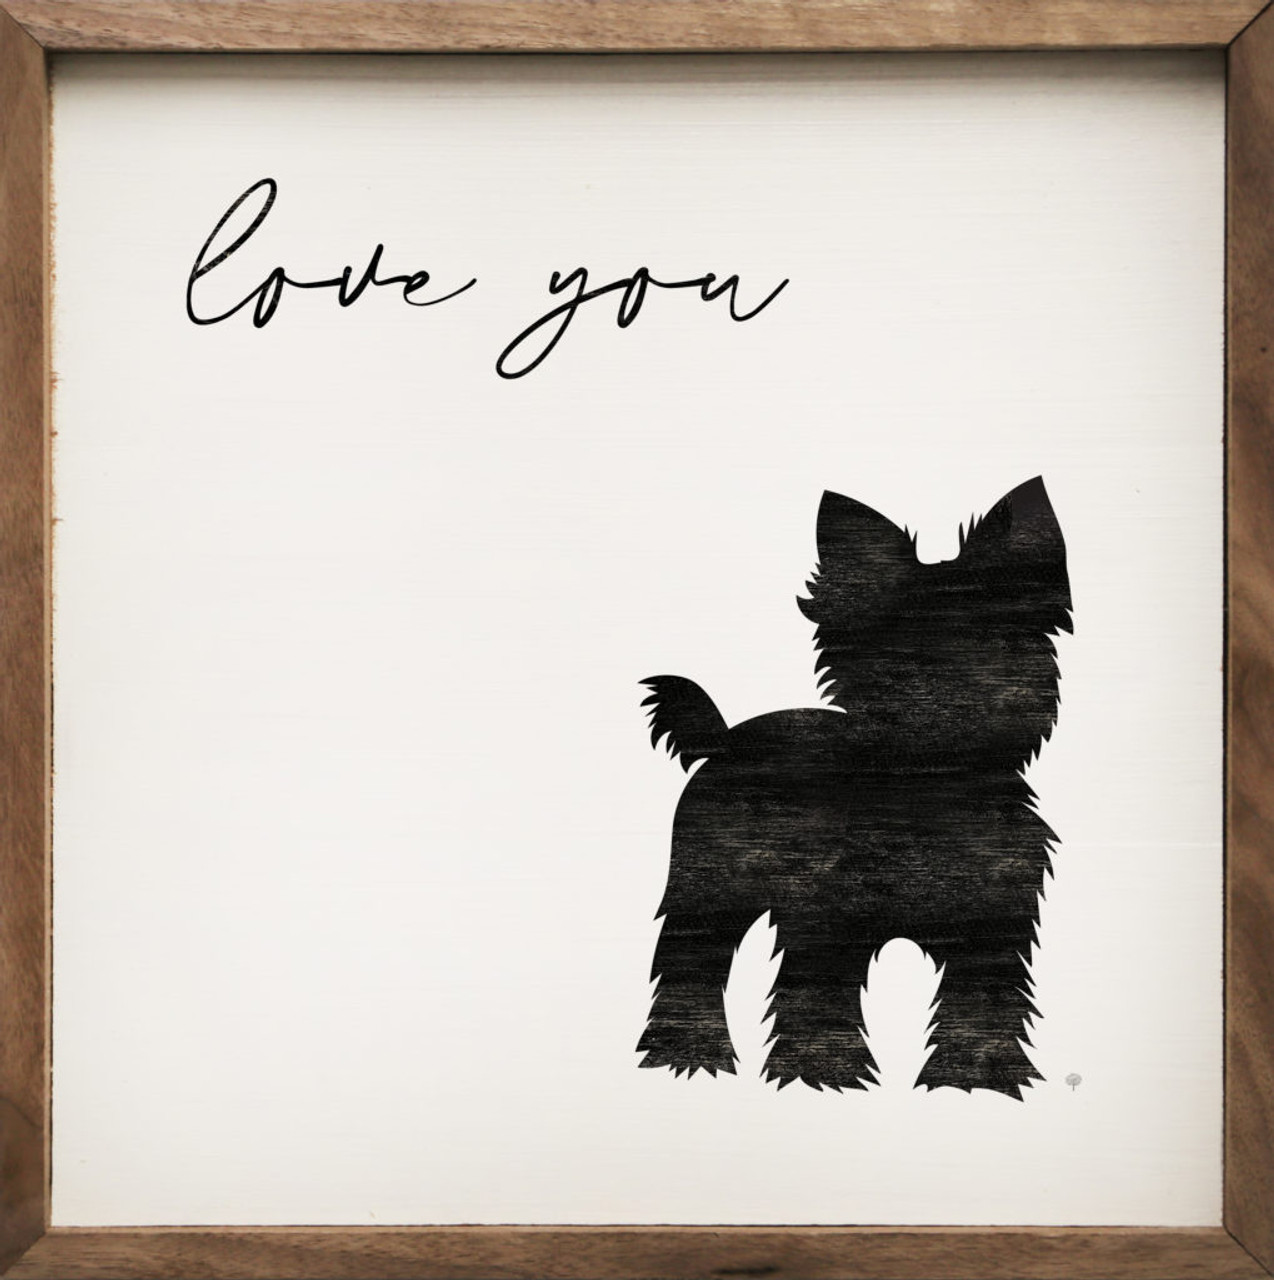 Love You with Yorkie Dog - Wood Framed Sign